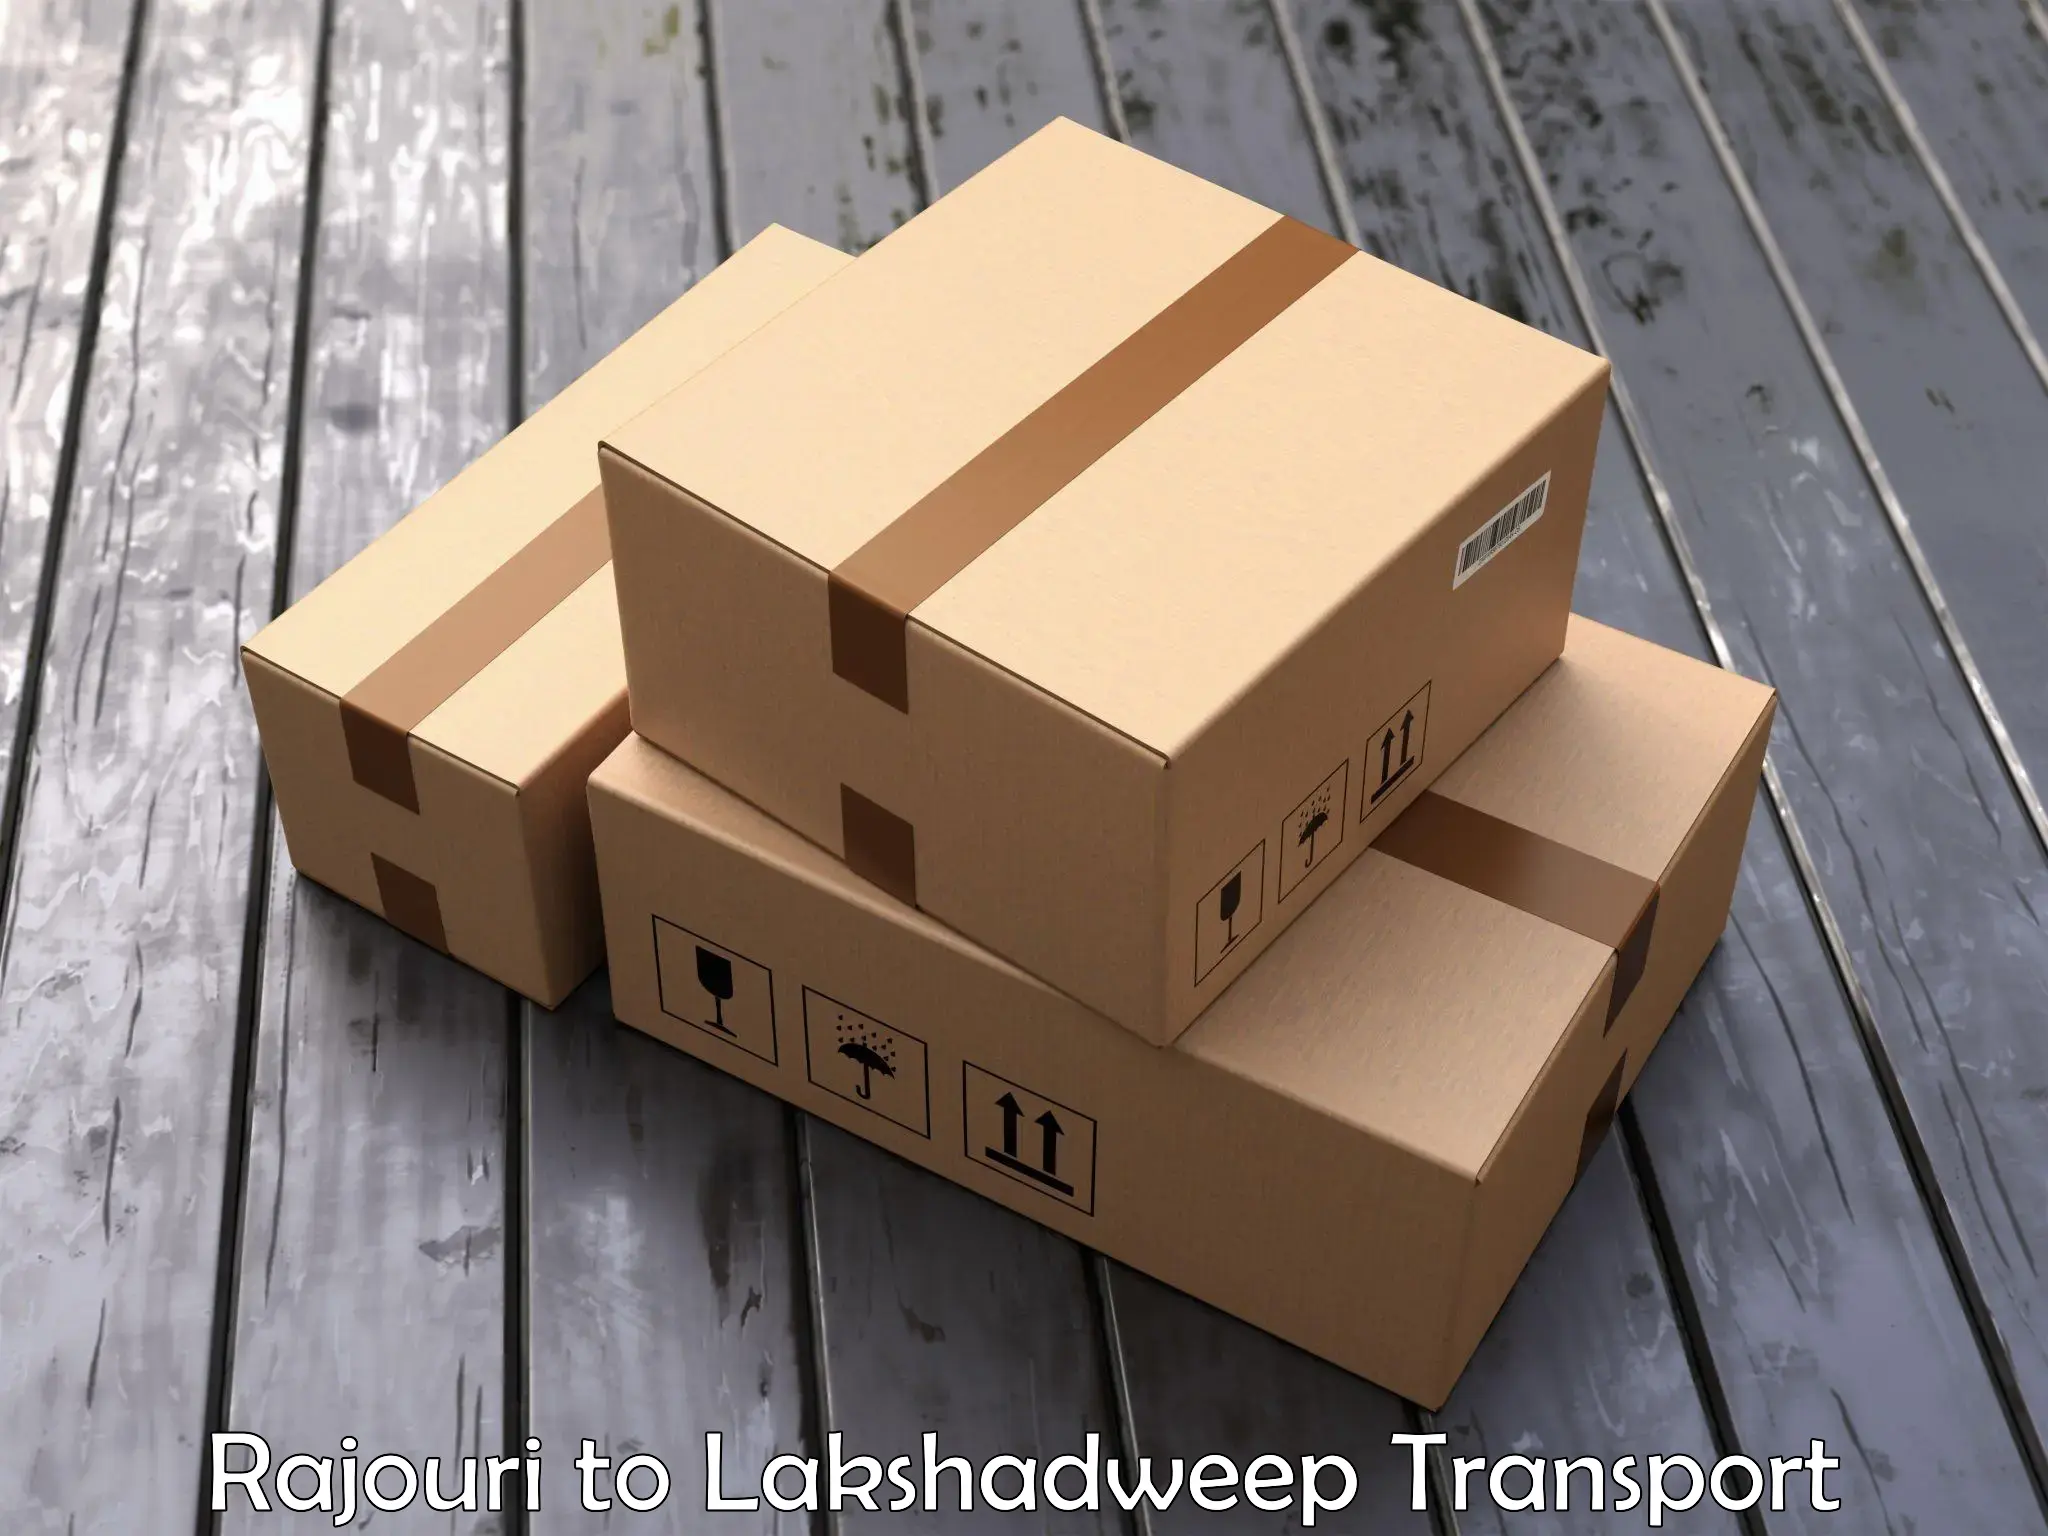 Daily parcel service transport Rajouri to Lakshadweep